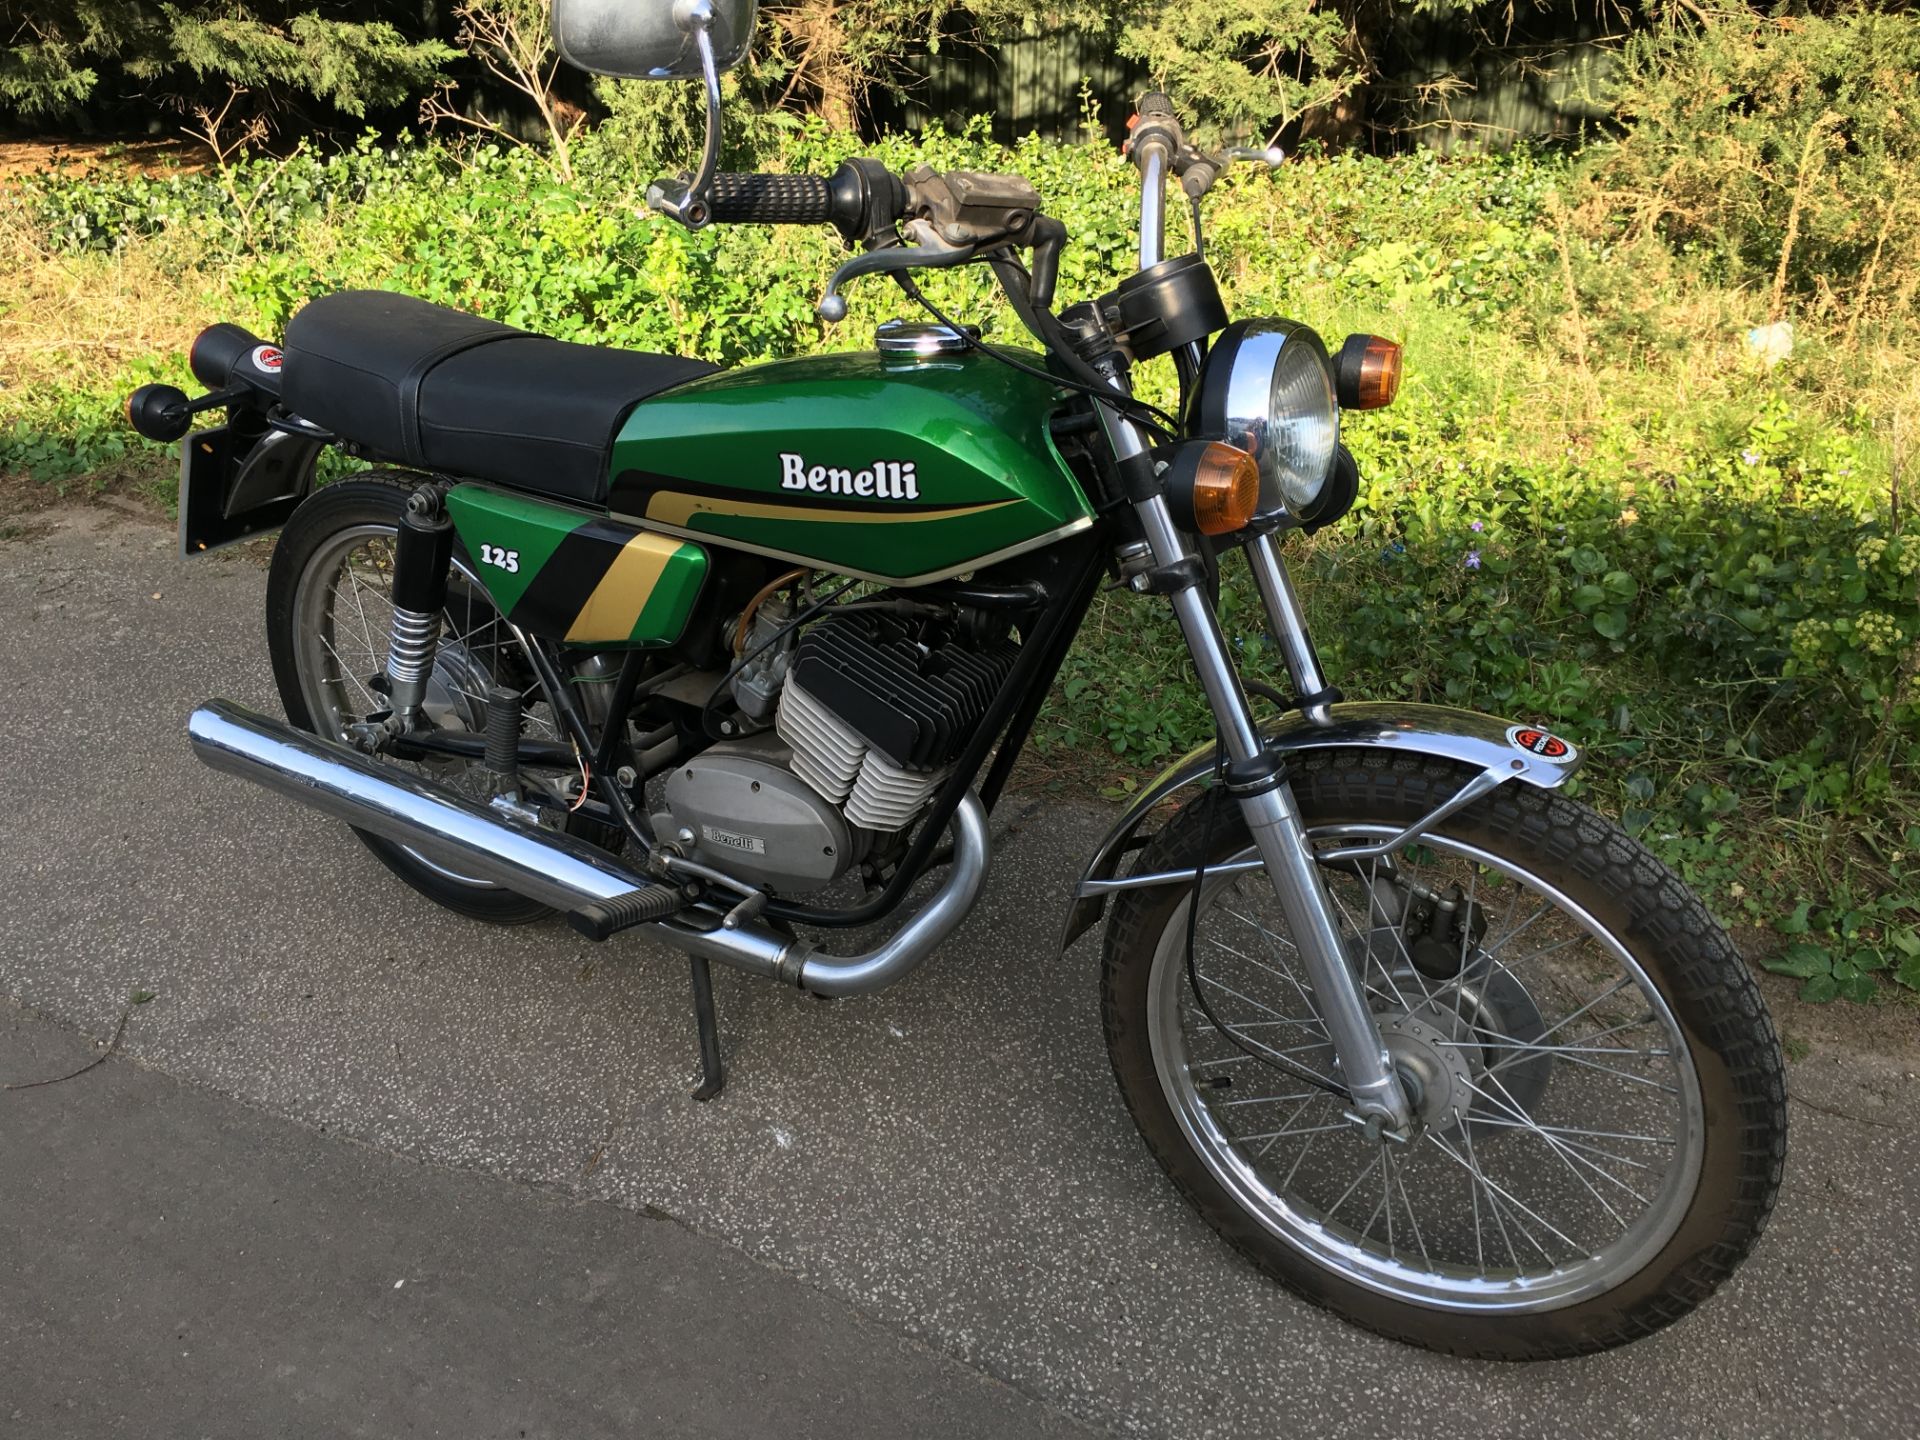 1978 Benelli 125s - Image 18 of 28